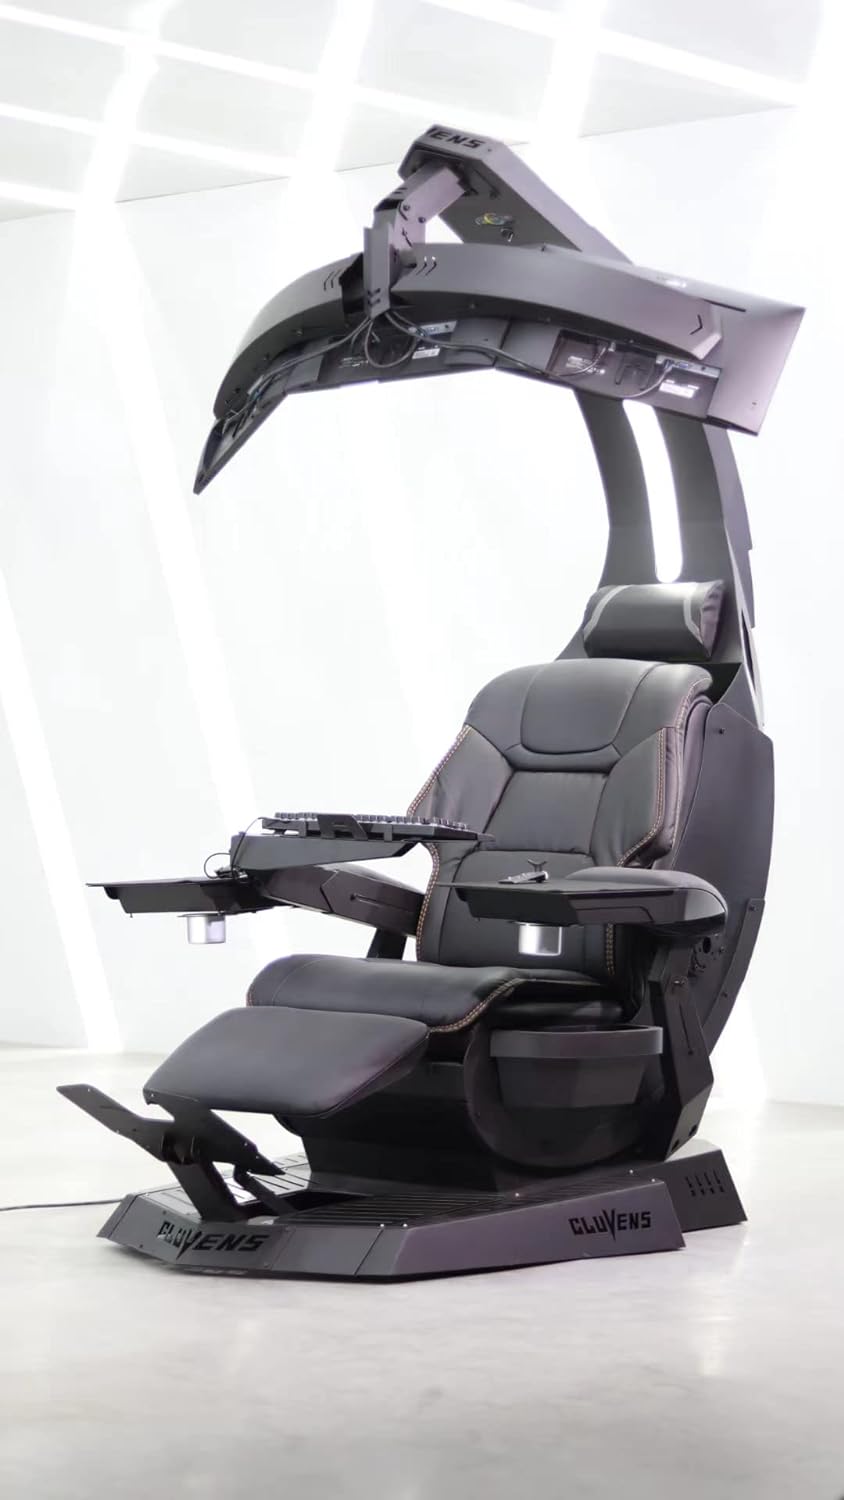 CLUVENS Unicorn 2.0 Manticore Model Zero Gravity Gaming Chair Cockpit Gaming Workstation Executive seat (Black Support 3 Monitors can Extent to 5 Monitors